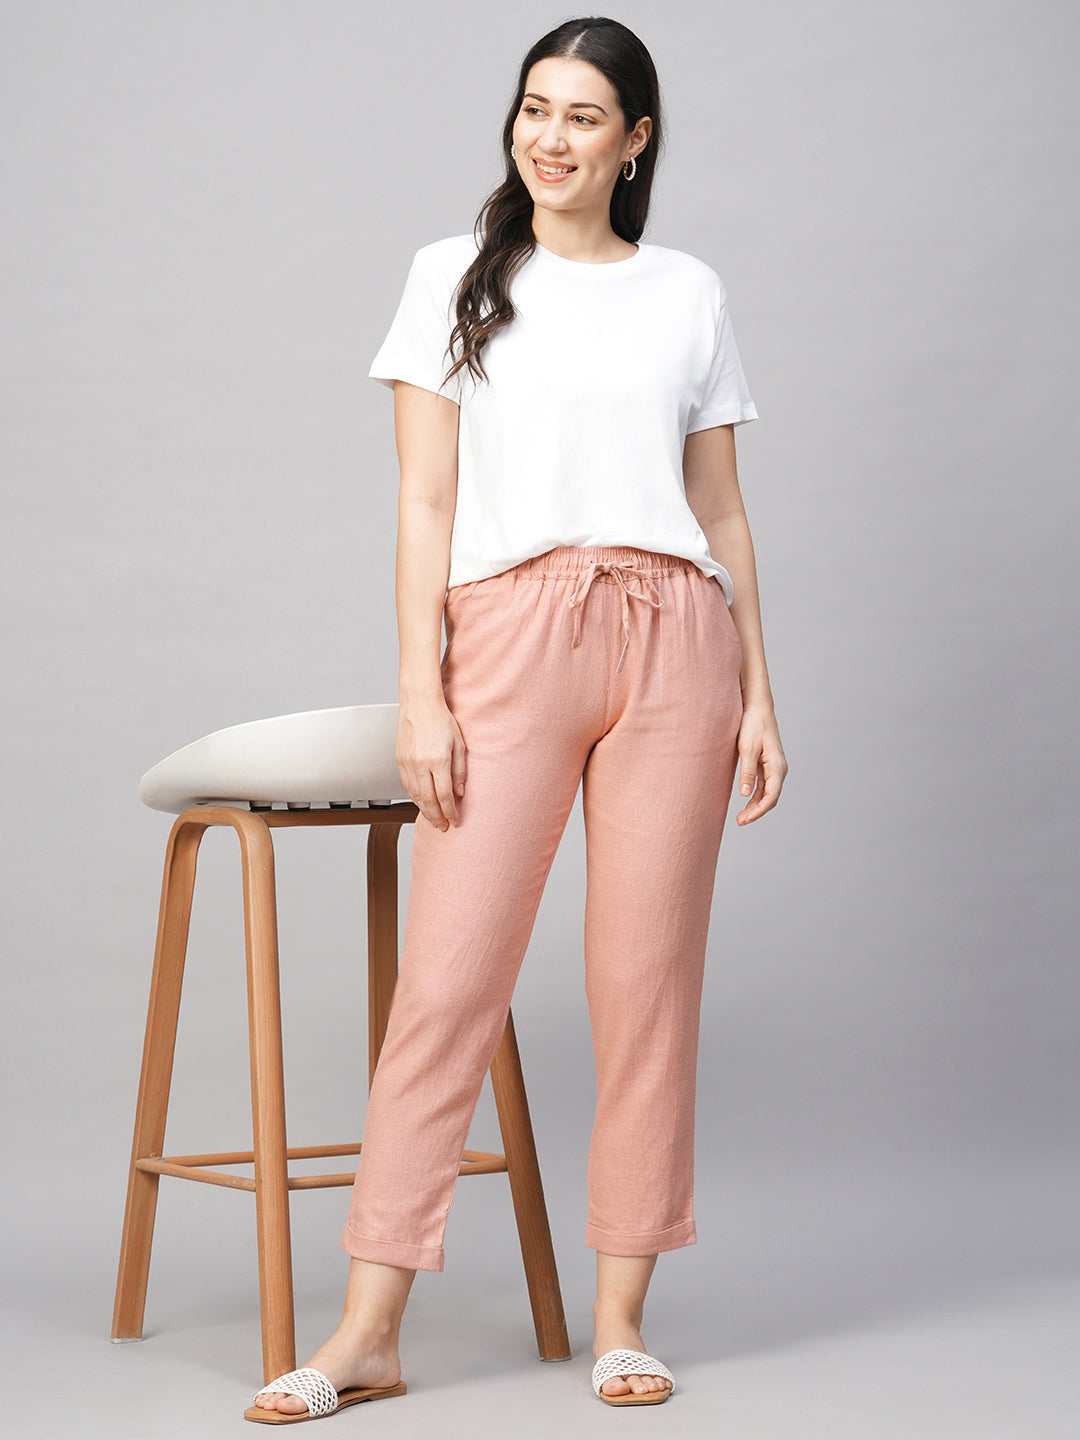 Buy Linen Pants for Women Online at an Amazing Price